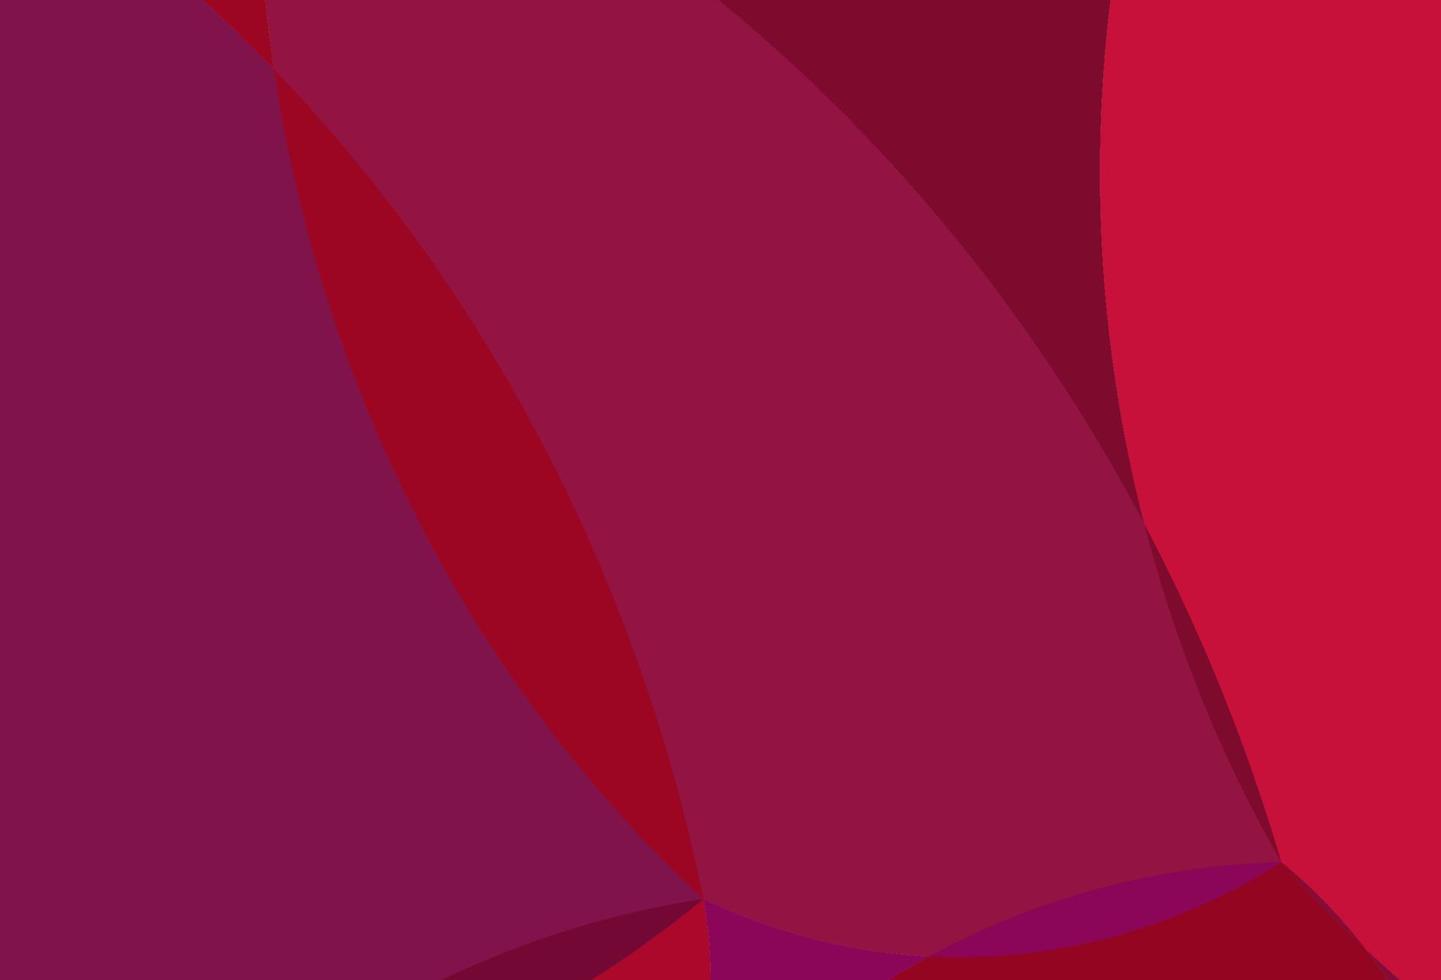 Dark Red vector background with liquid shapes.